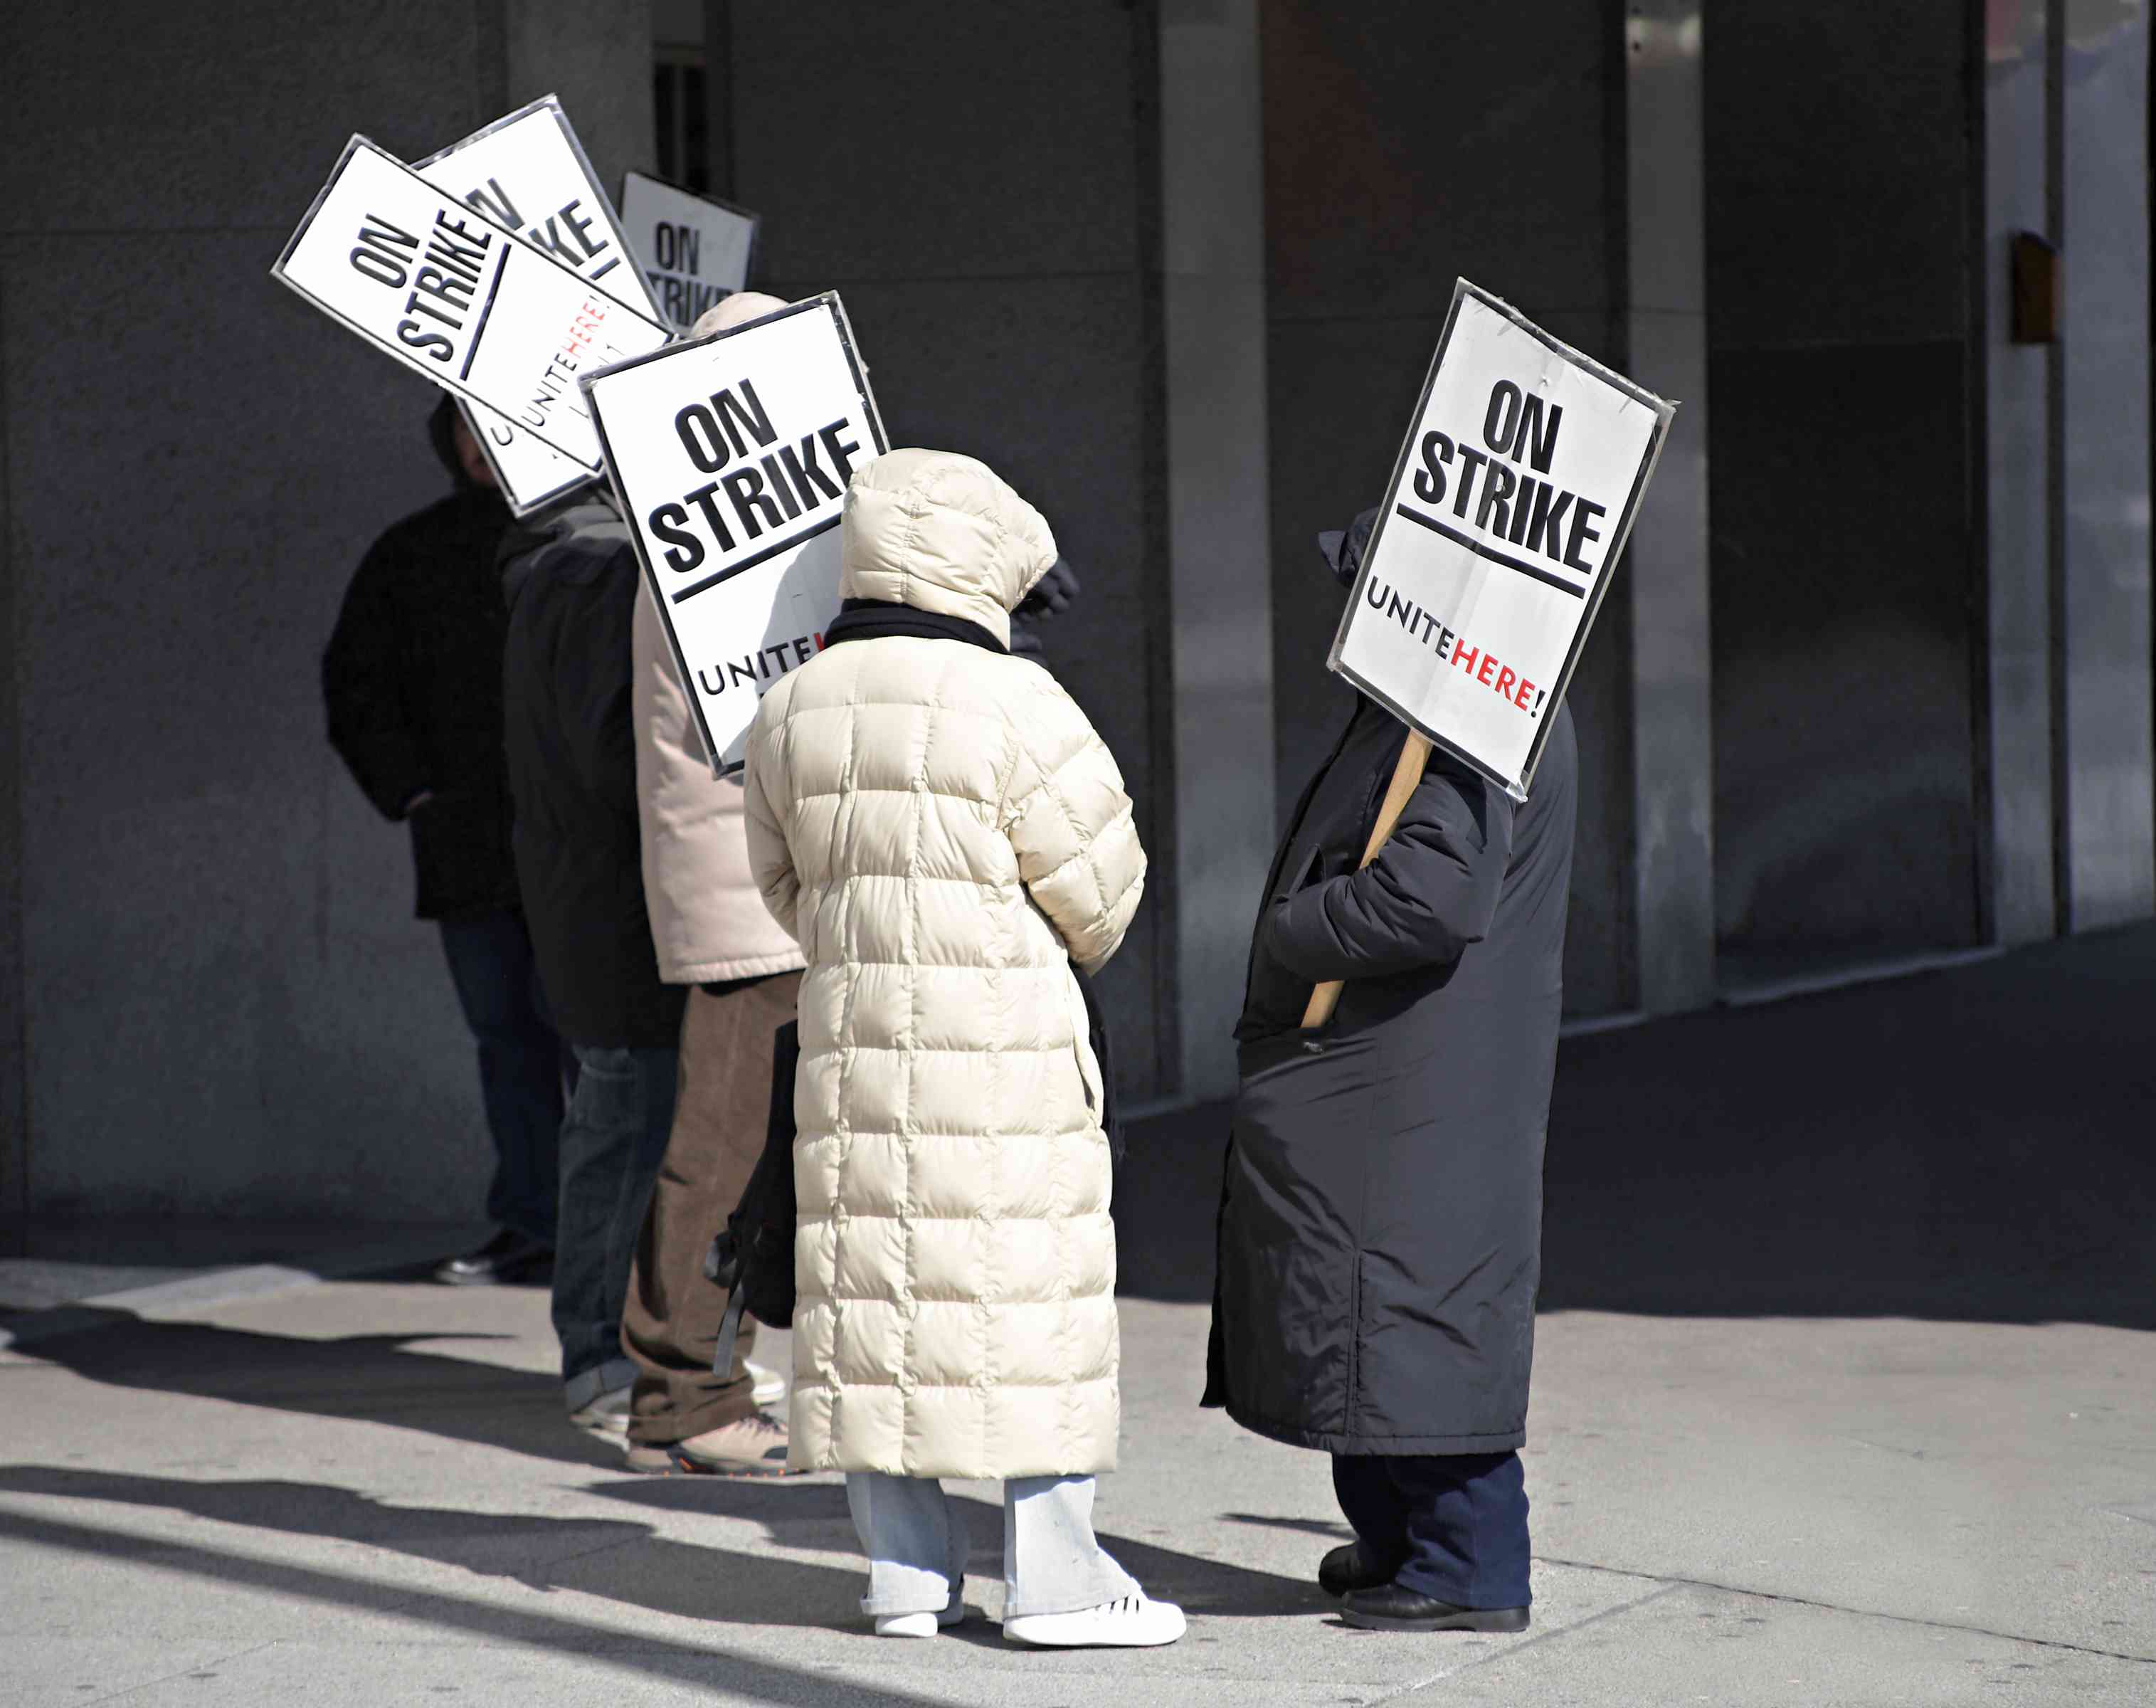 A group of union workers on strike is an indication of organized labor practices.